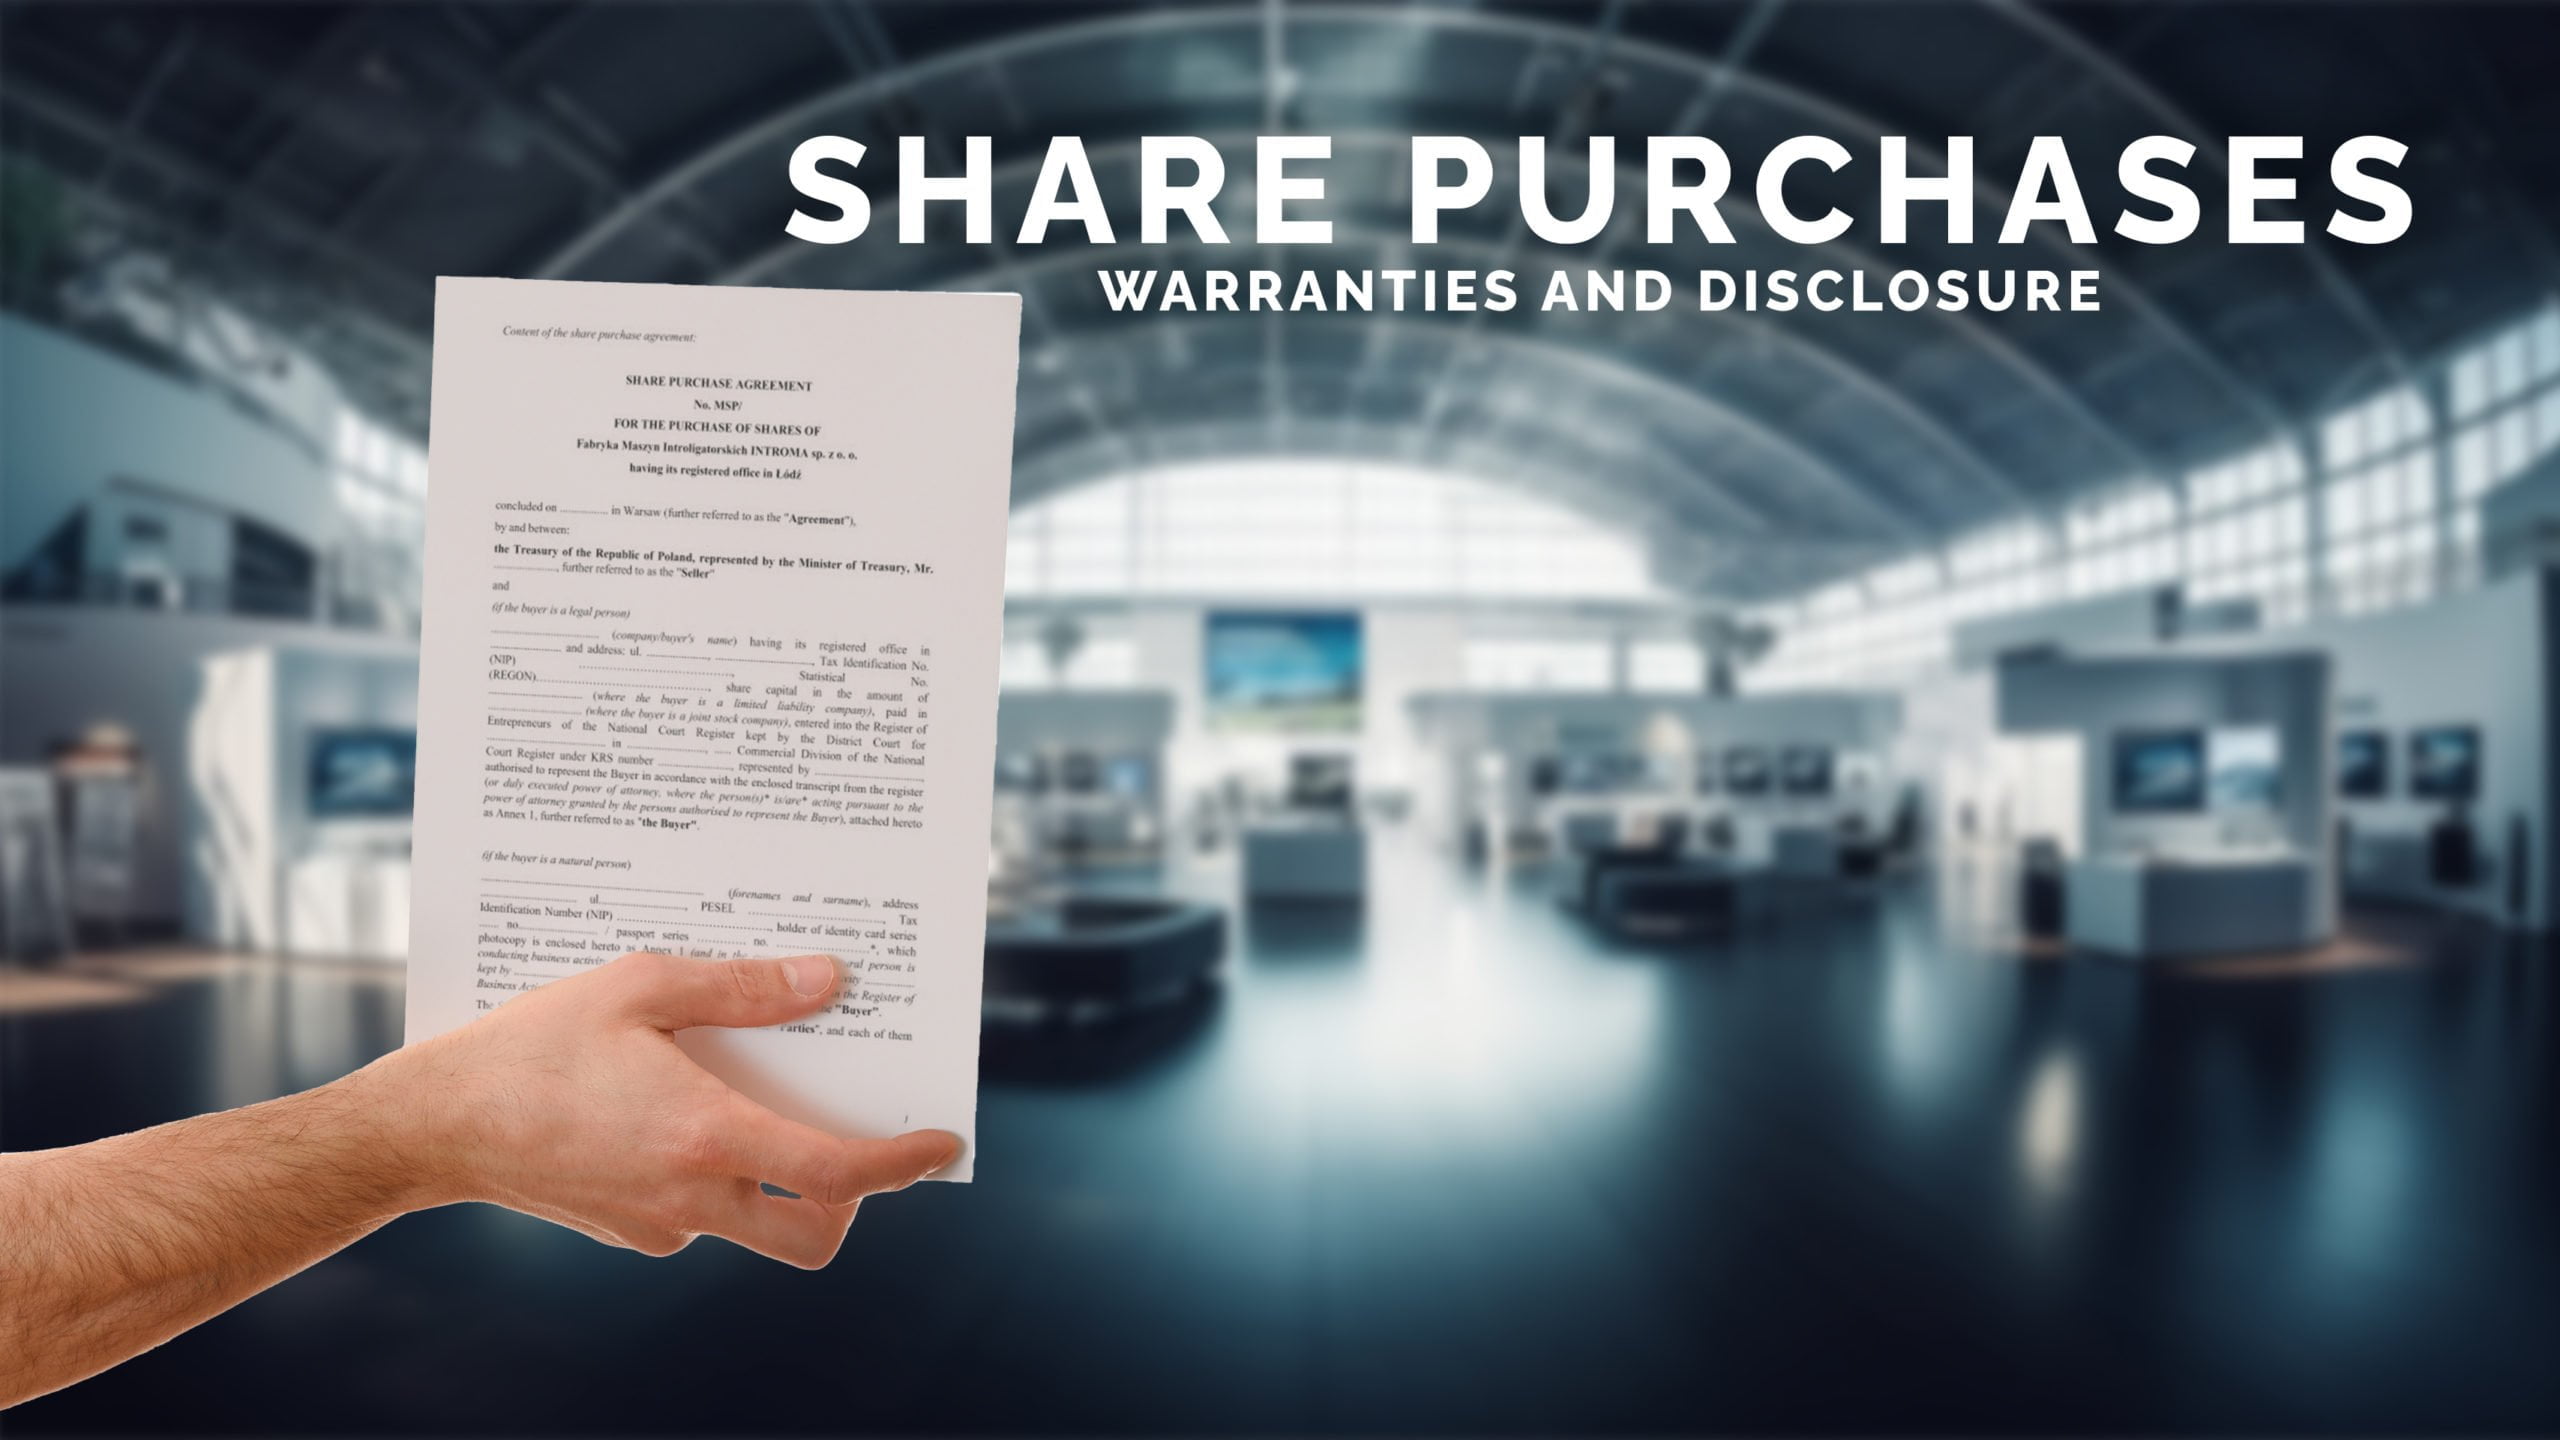 Share Purchases – Warranties and Disclosure